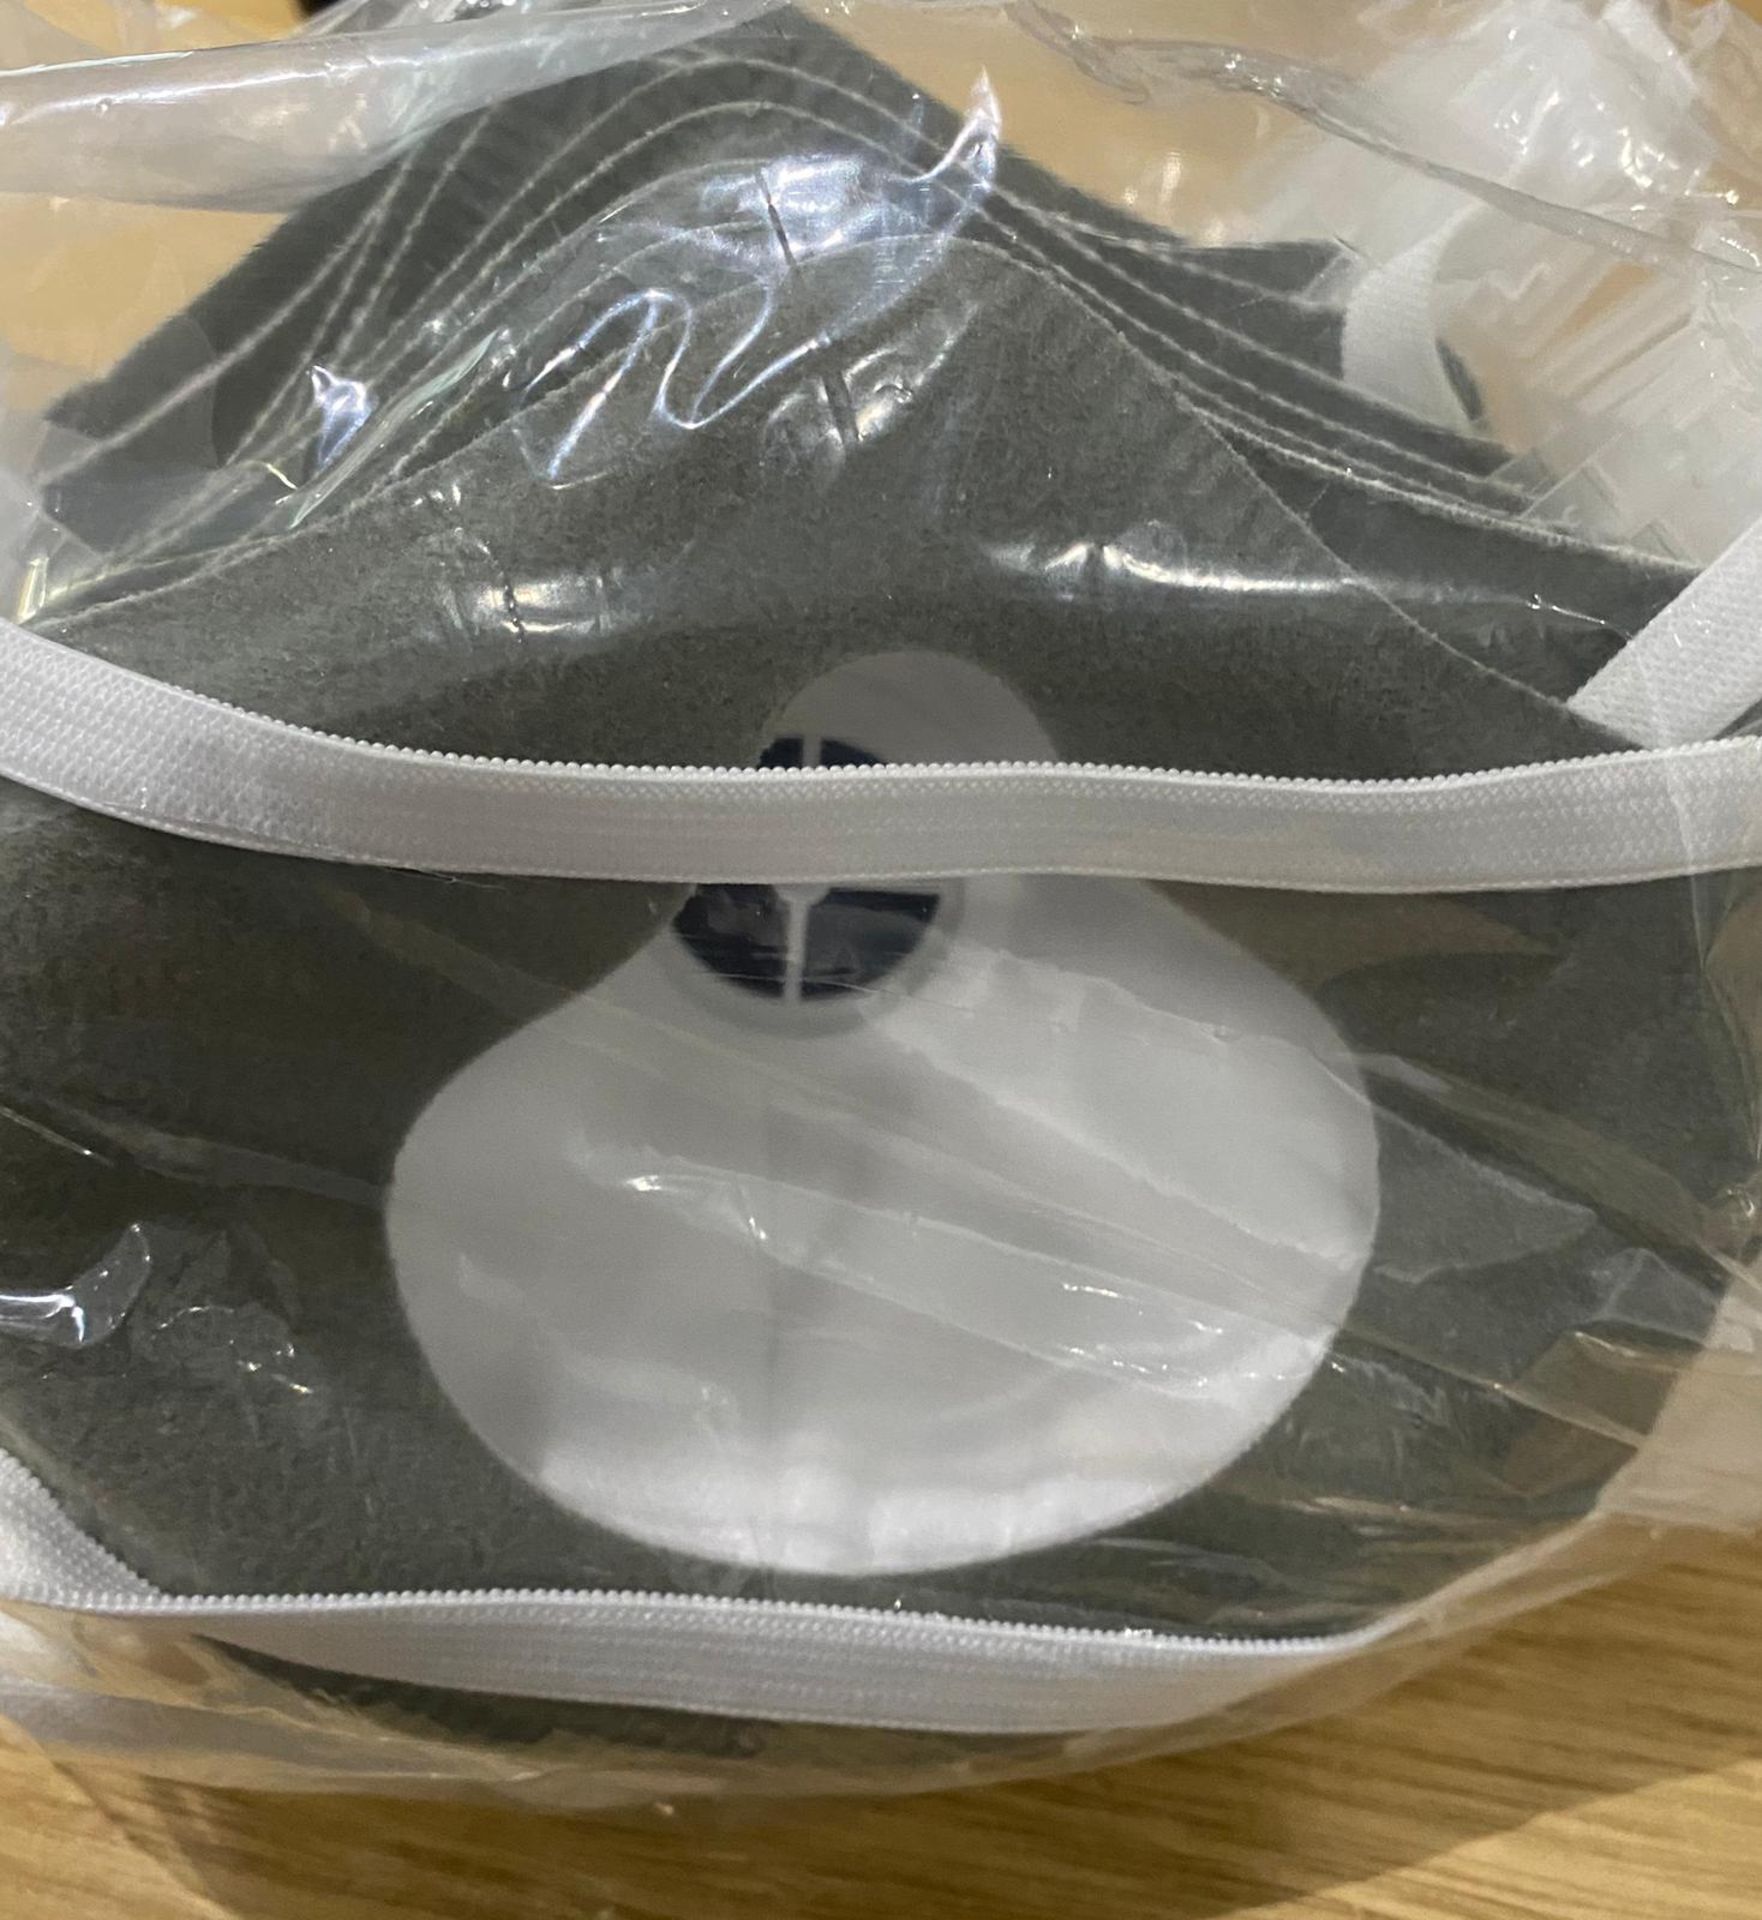 1,000 x Handanhy Fold Flat Disposable Face Masks With Exhalation Valves - Type HY8232 FFP3 - PPE - Image 2 of 5